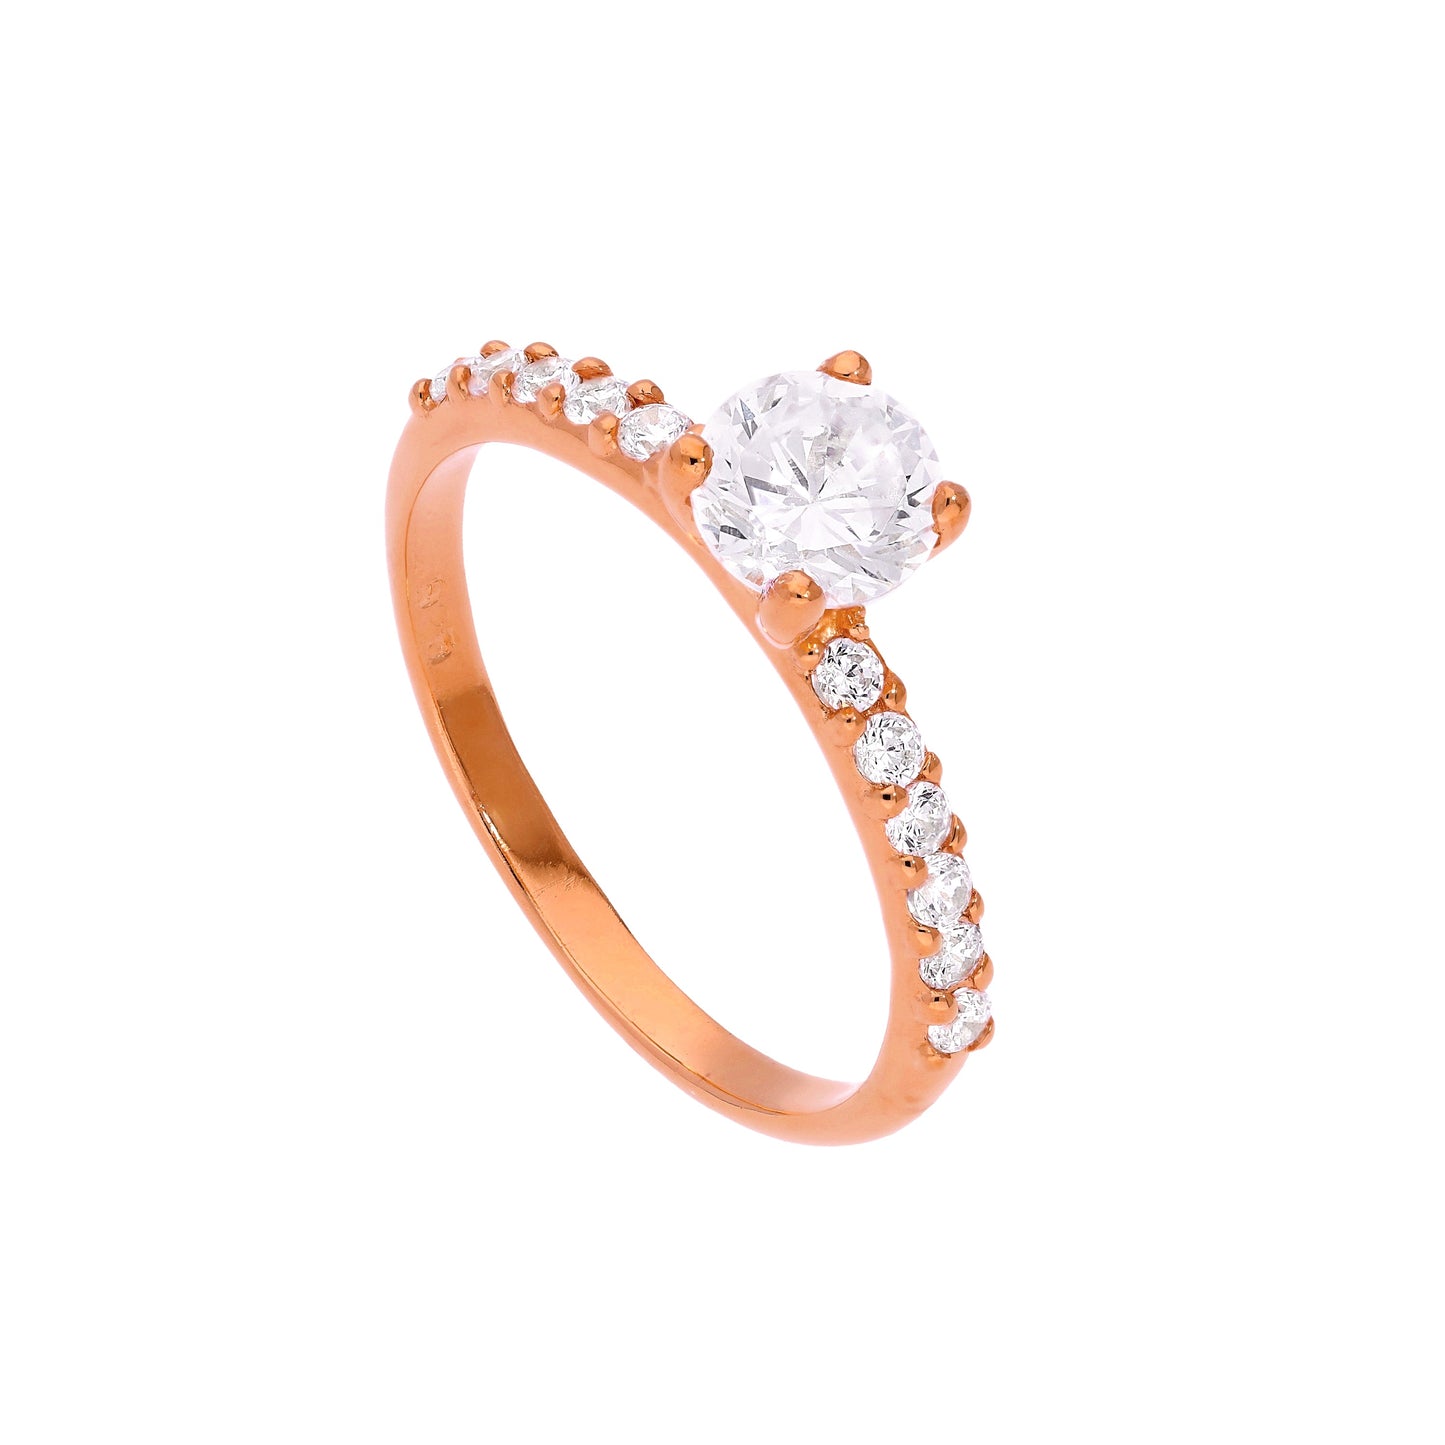 Rose Gold Plated Sterling Silver & Clear CZ Crystal Ring Size J - W